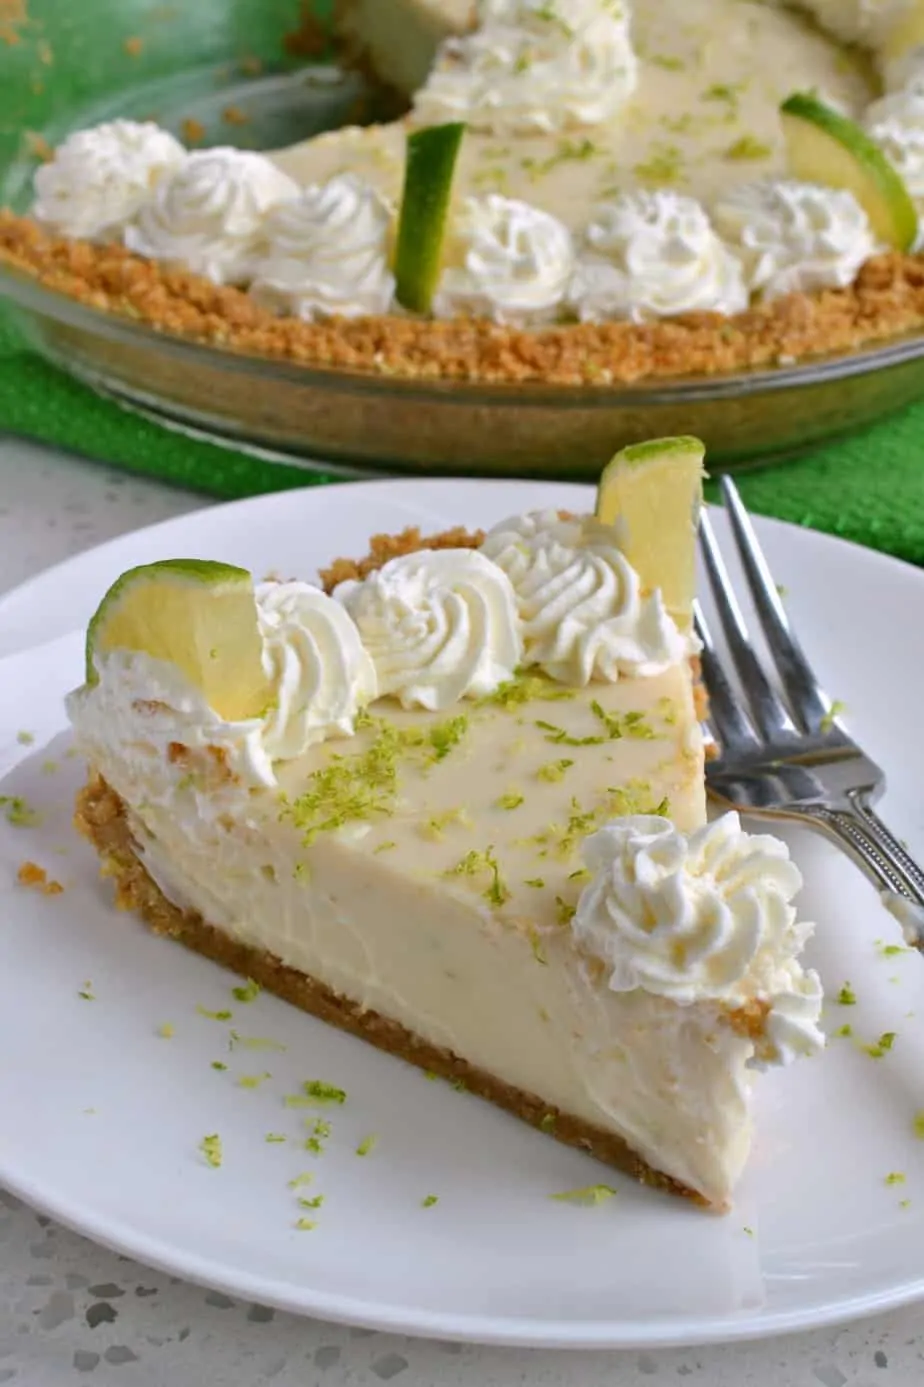 There is nothing quite as scrumptious as a fresh homemade Key Lime Pie.